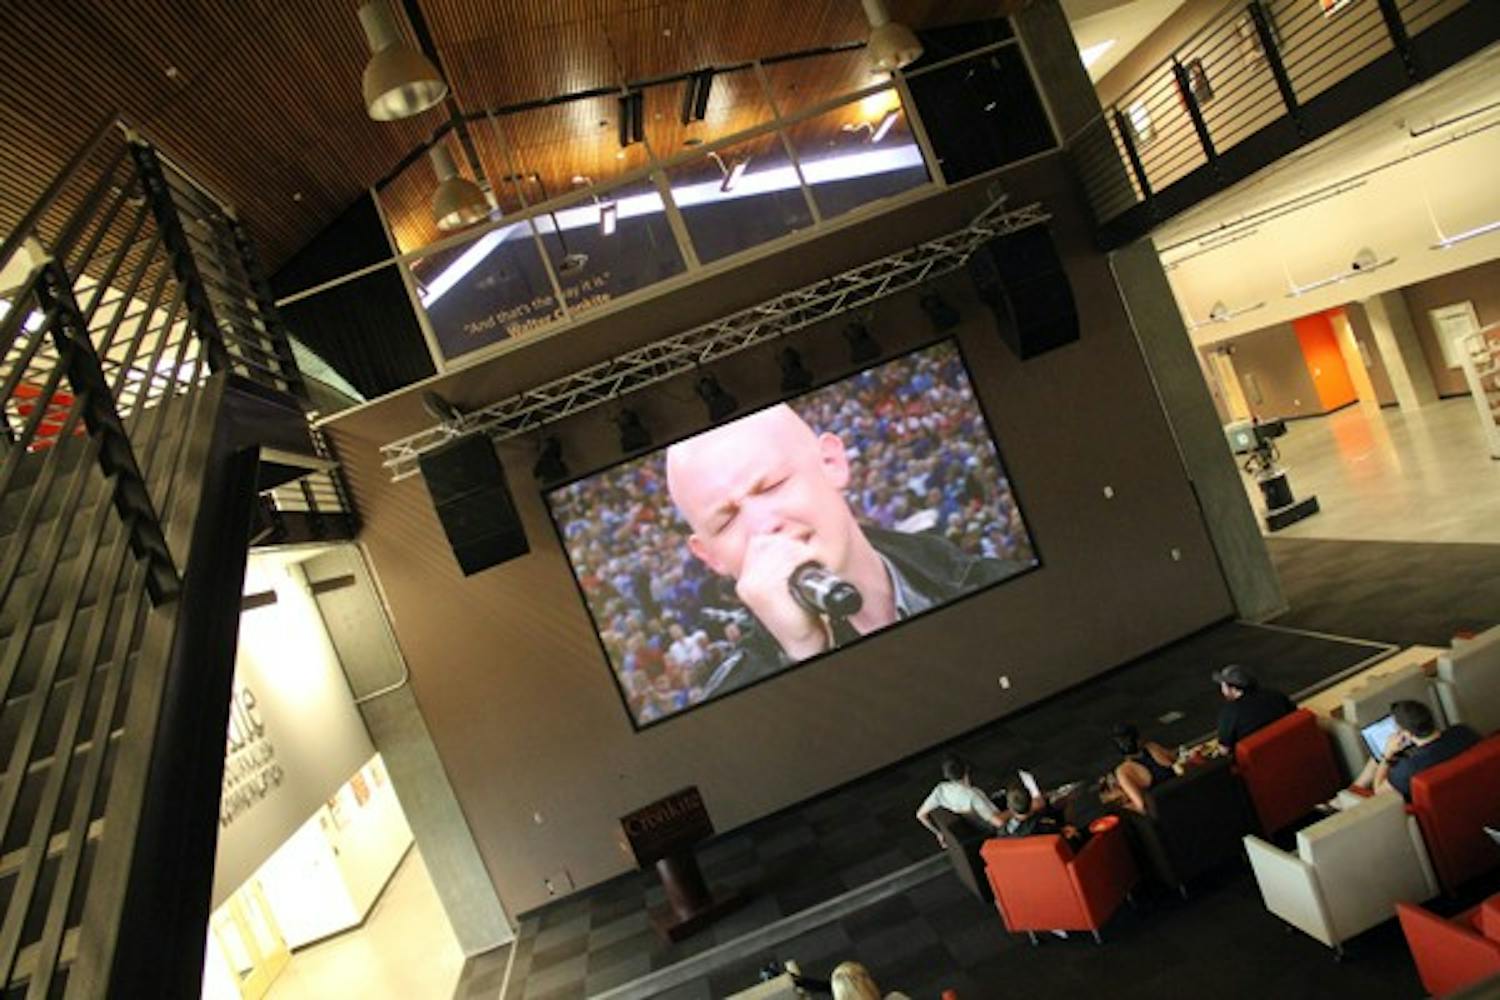 Students watch The Fray perform the National Anthem before the NCAA men’s basketball national championship in the First Amendment Forum at the Walter Cronkite School of Journalism and Mass Communication Monday night. (Photo by Diana Lustig)